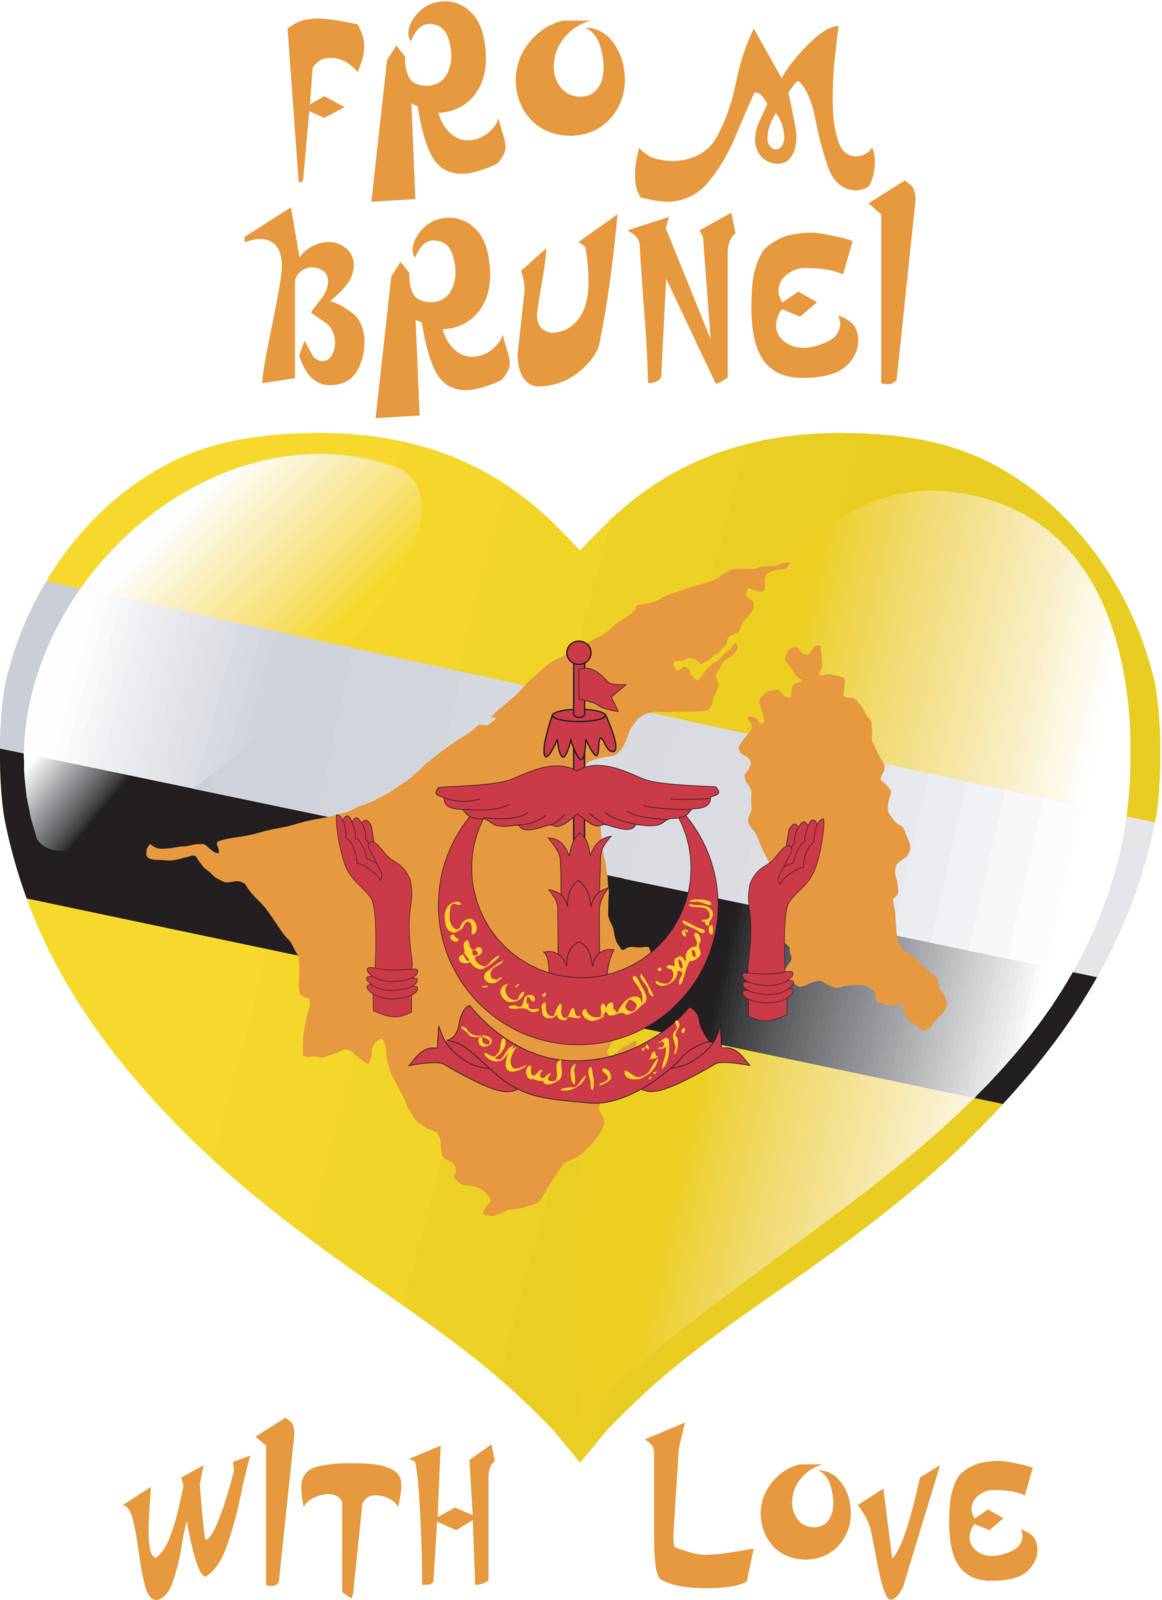 from Brunei with love by Perysty